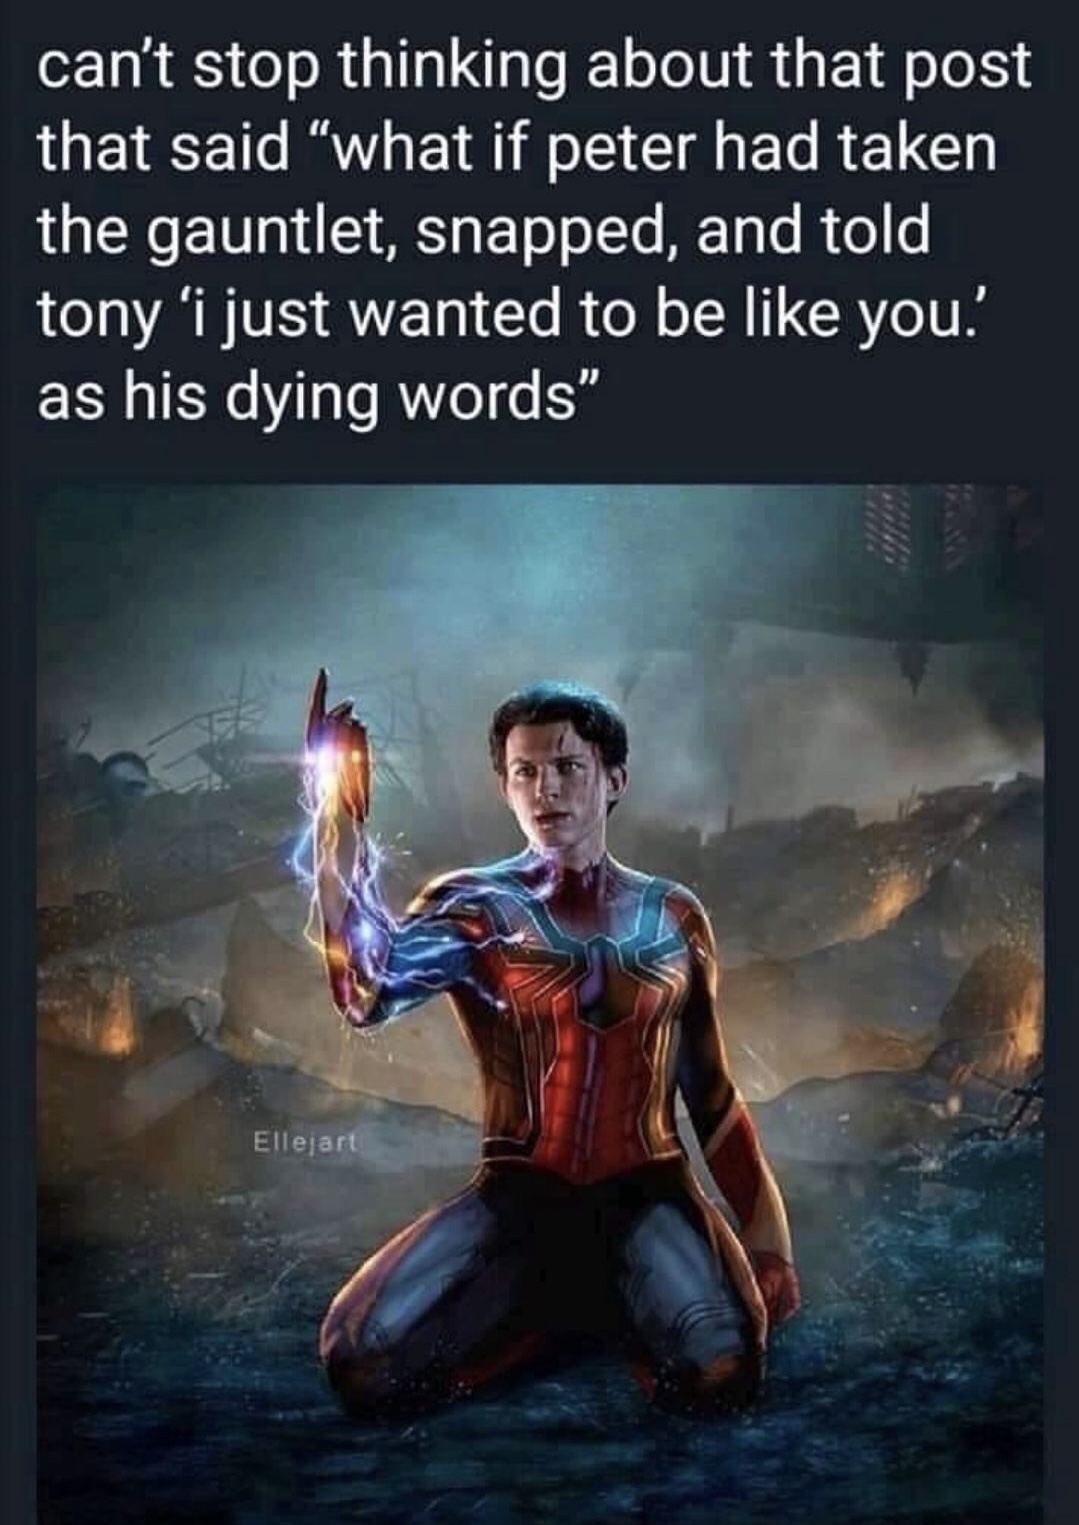 lyrics - can't stop thinking about that post that said "what if peter had taken the gauntlet, snapped, and told tony i just wanted to be you! as his dying words" Ellejart